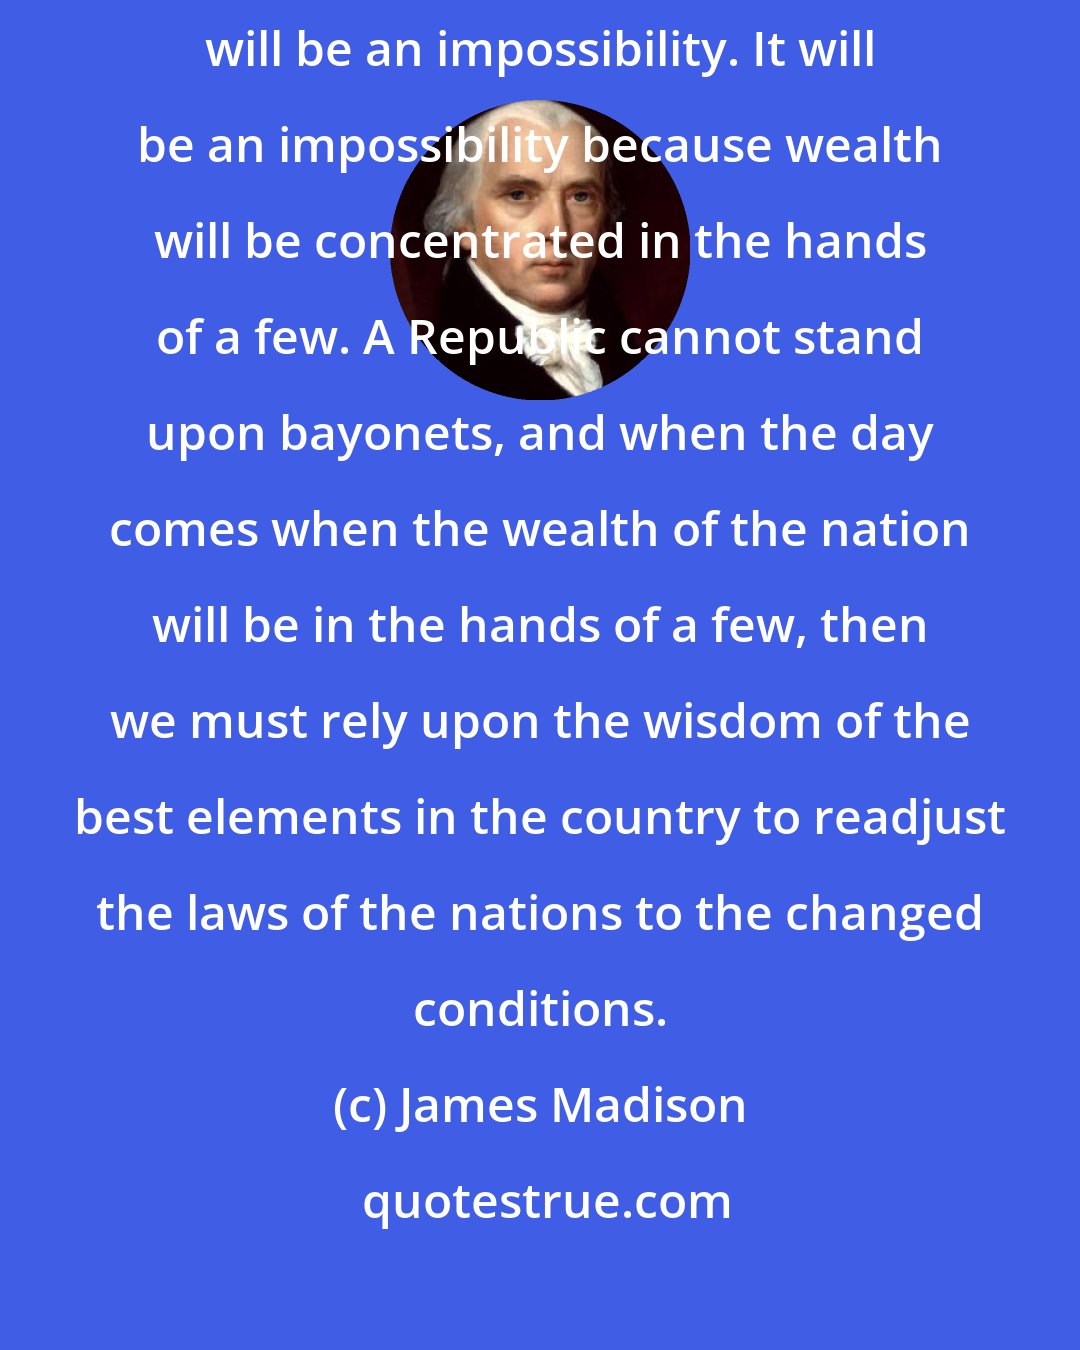 James Madison: We are free today substantially, but the day will come when our Republic will be an impossibility. It will be an impossibility because wealth will be concentrated in the hands of a few. A Republic cannot stand upon bayonets, and when the day comes when the wealth of the nation will be in the hands of a few, then we must rely upon the wisdom of the best elements in the country to readjust the laws of the nations to the changed conditions.